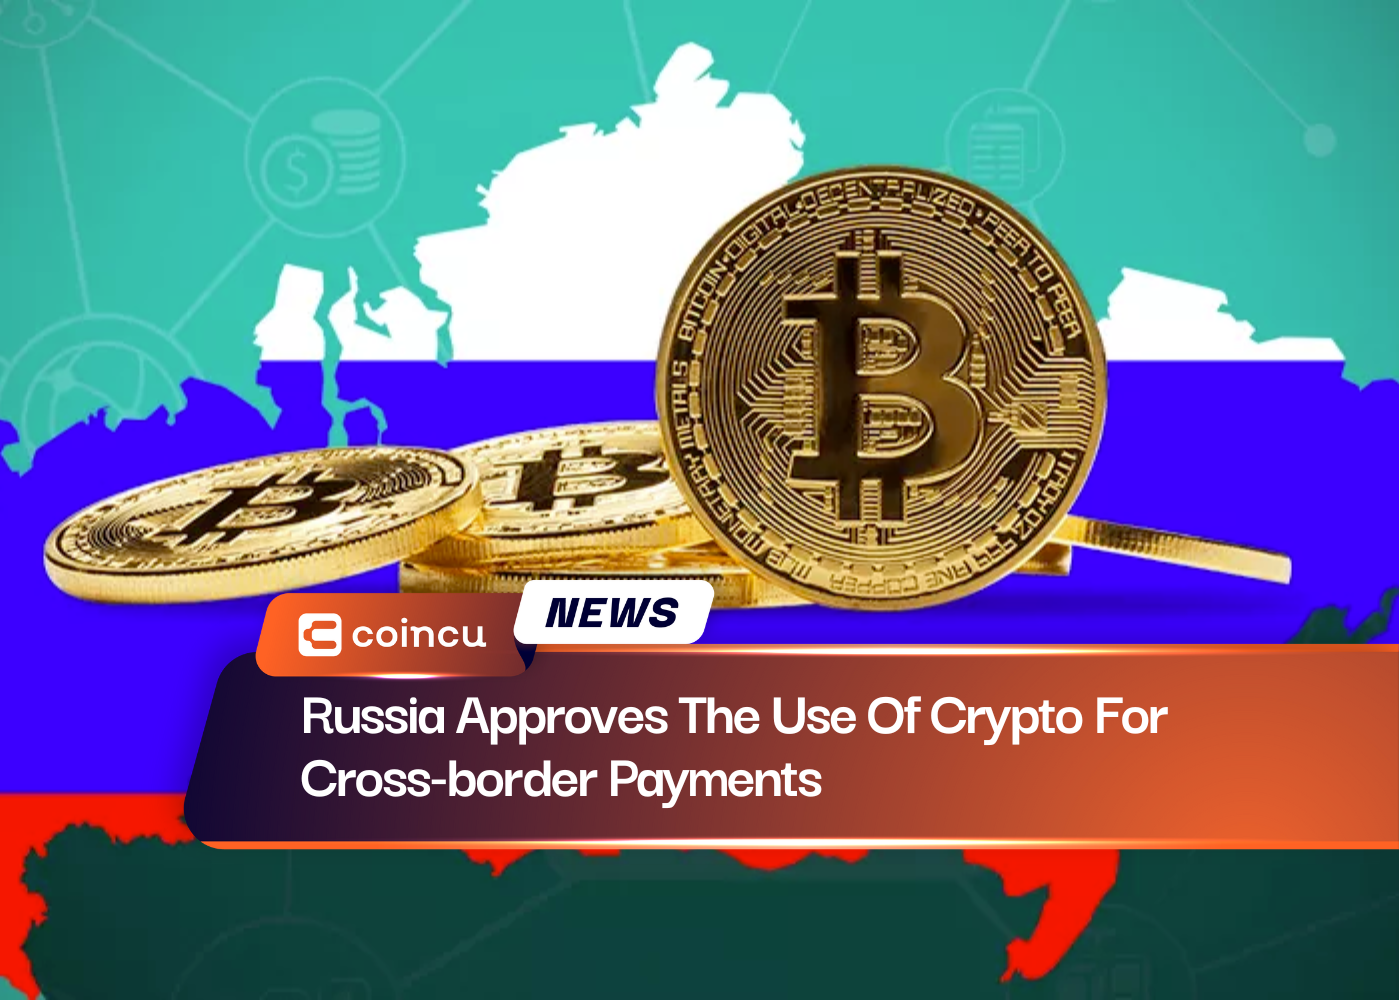 Russia Approves The Use Of Crypto For Cross-border Payments